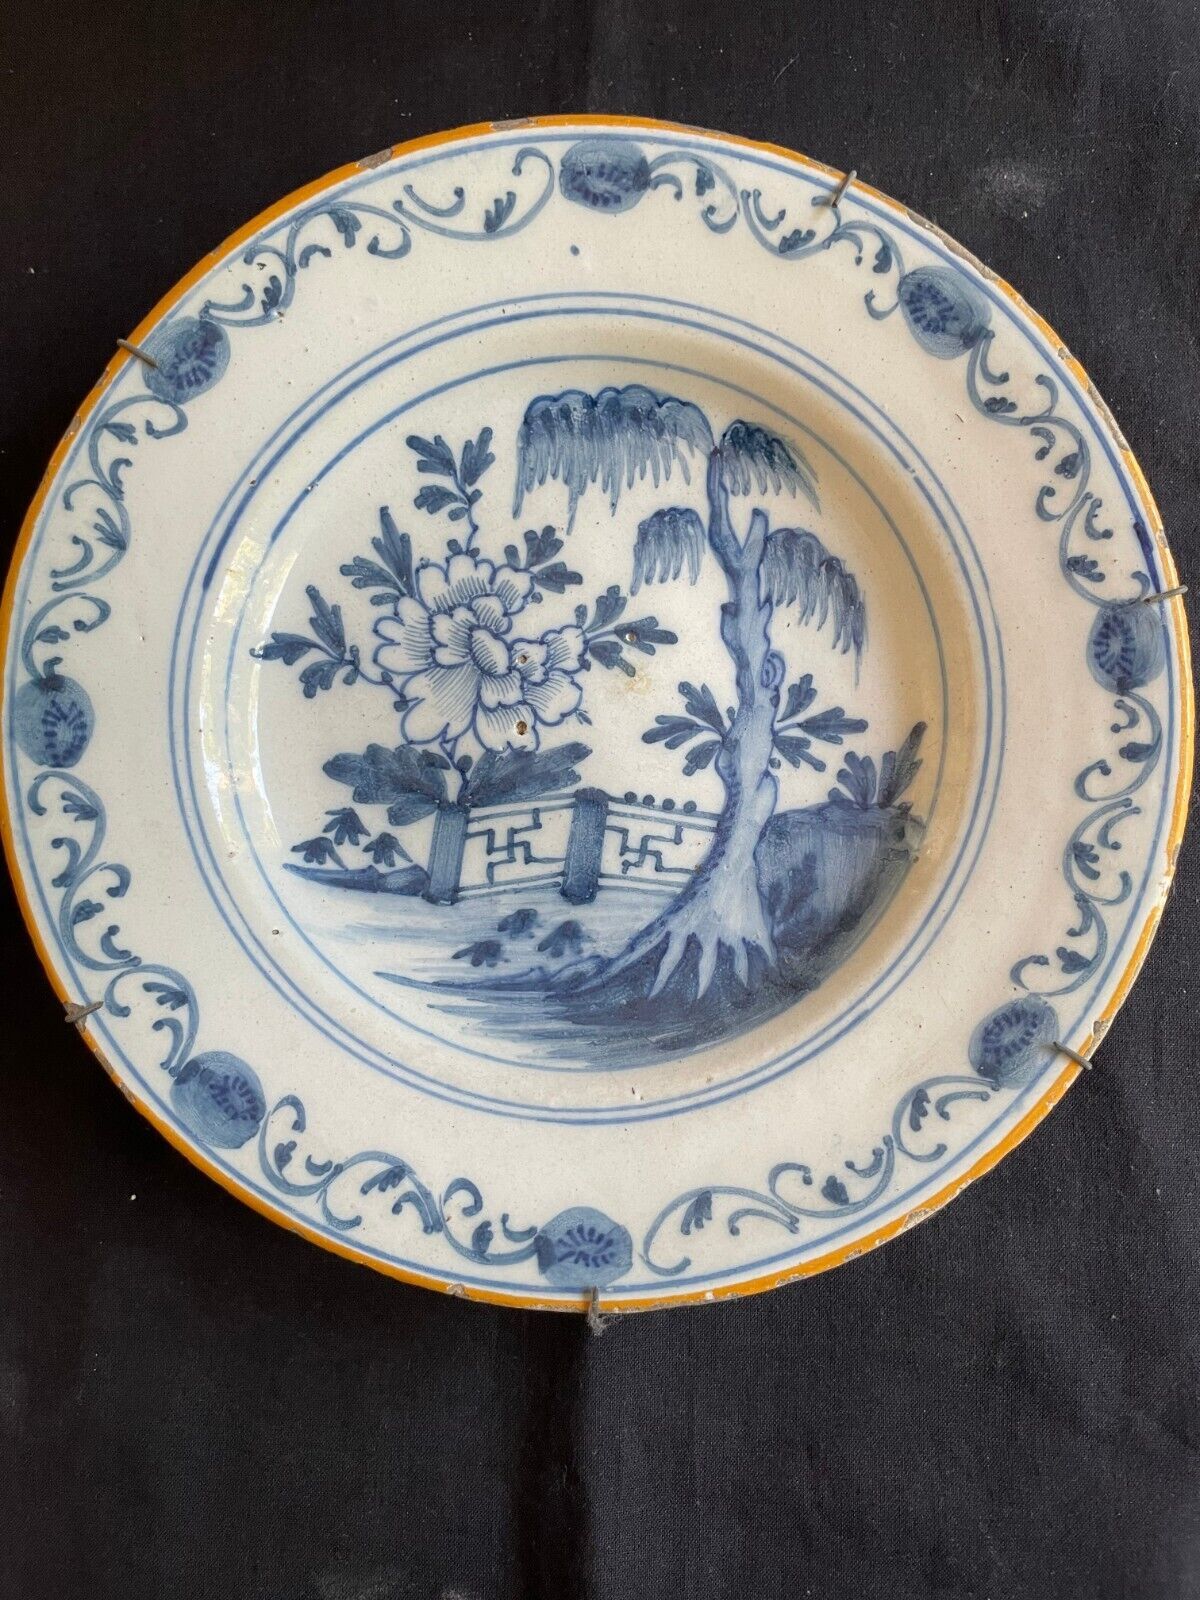 Primary image for antique chinese pottery plate with garden scene 